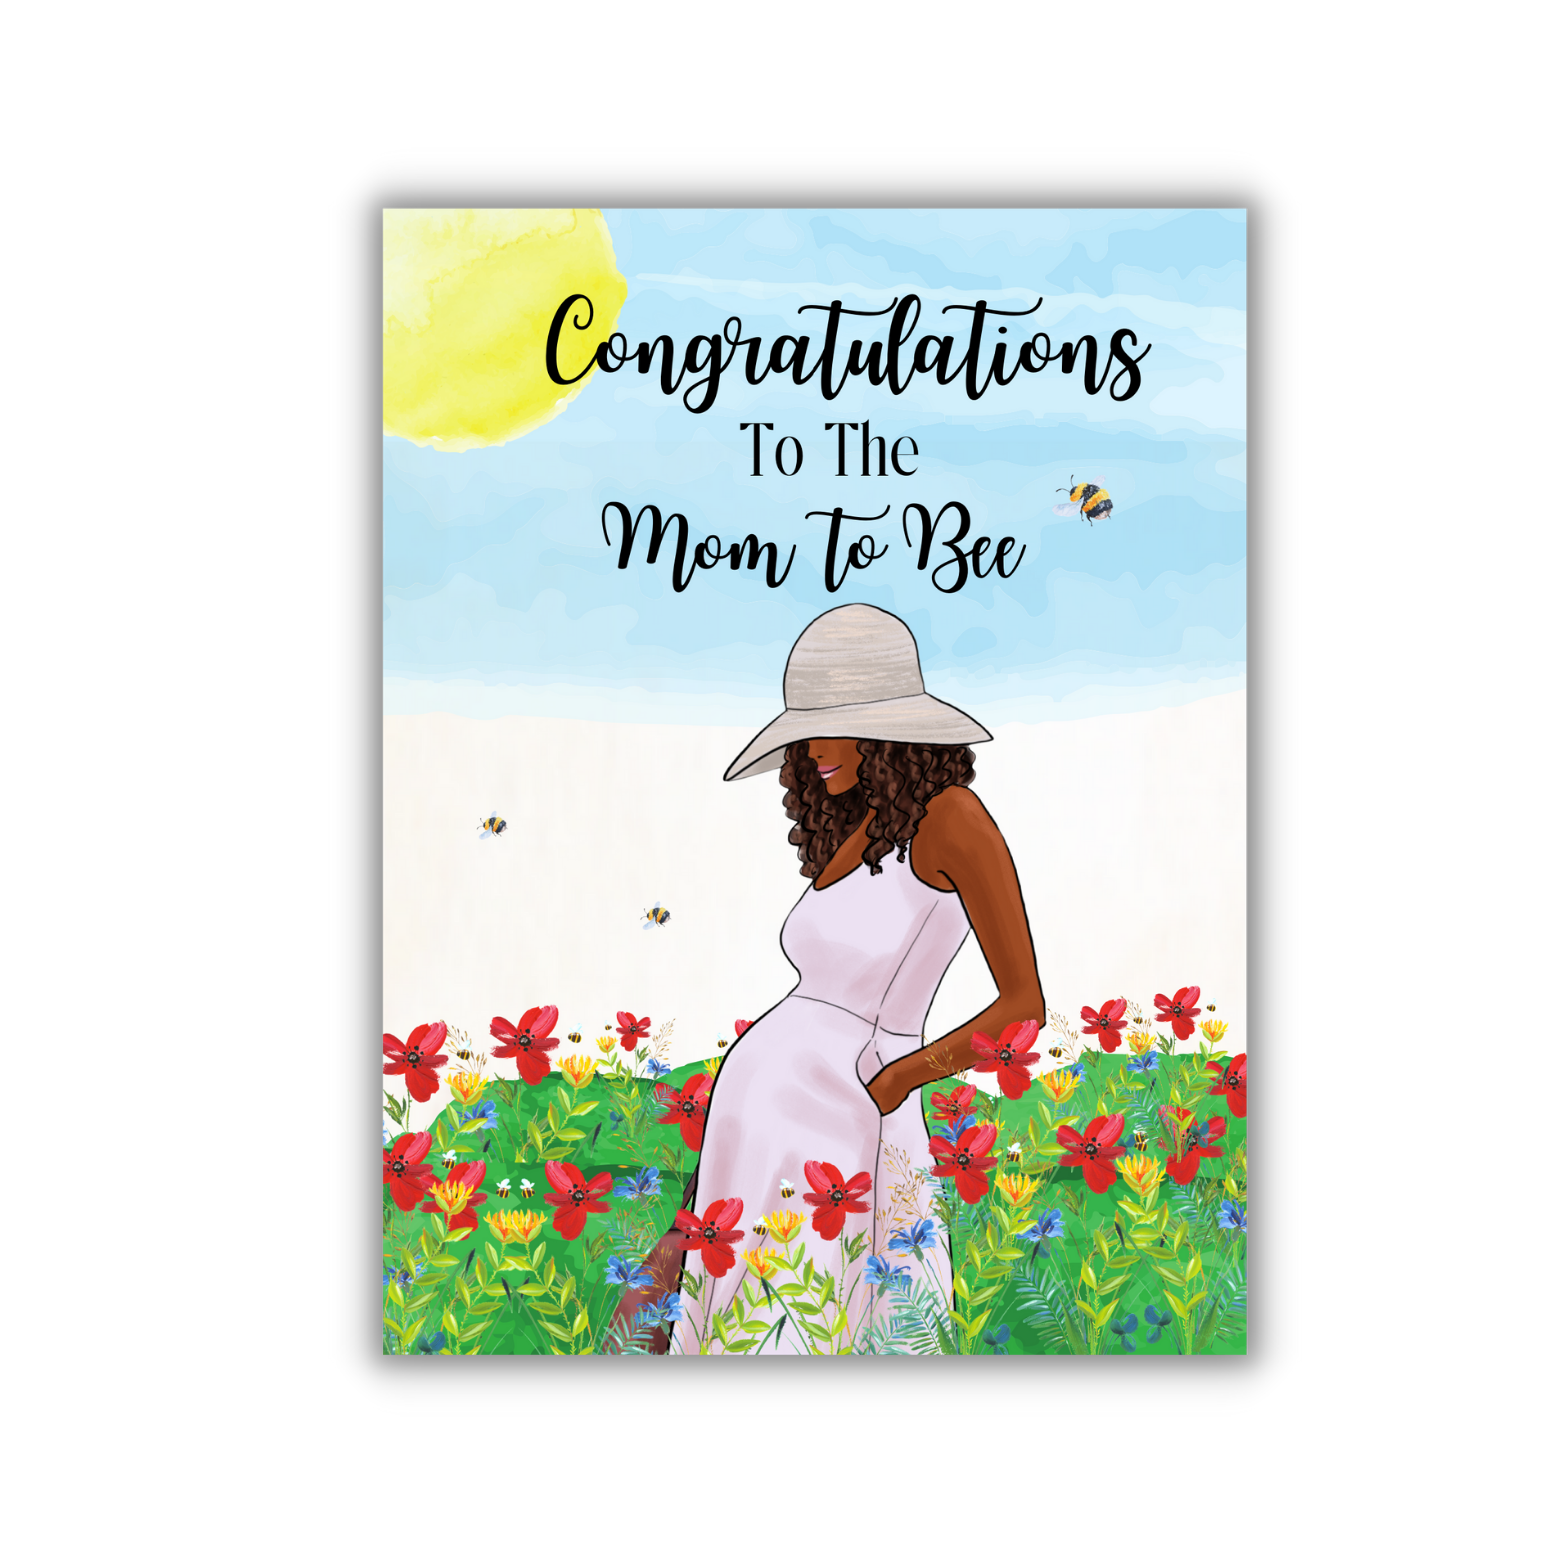 Congrats to the Mother to Bee